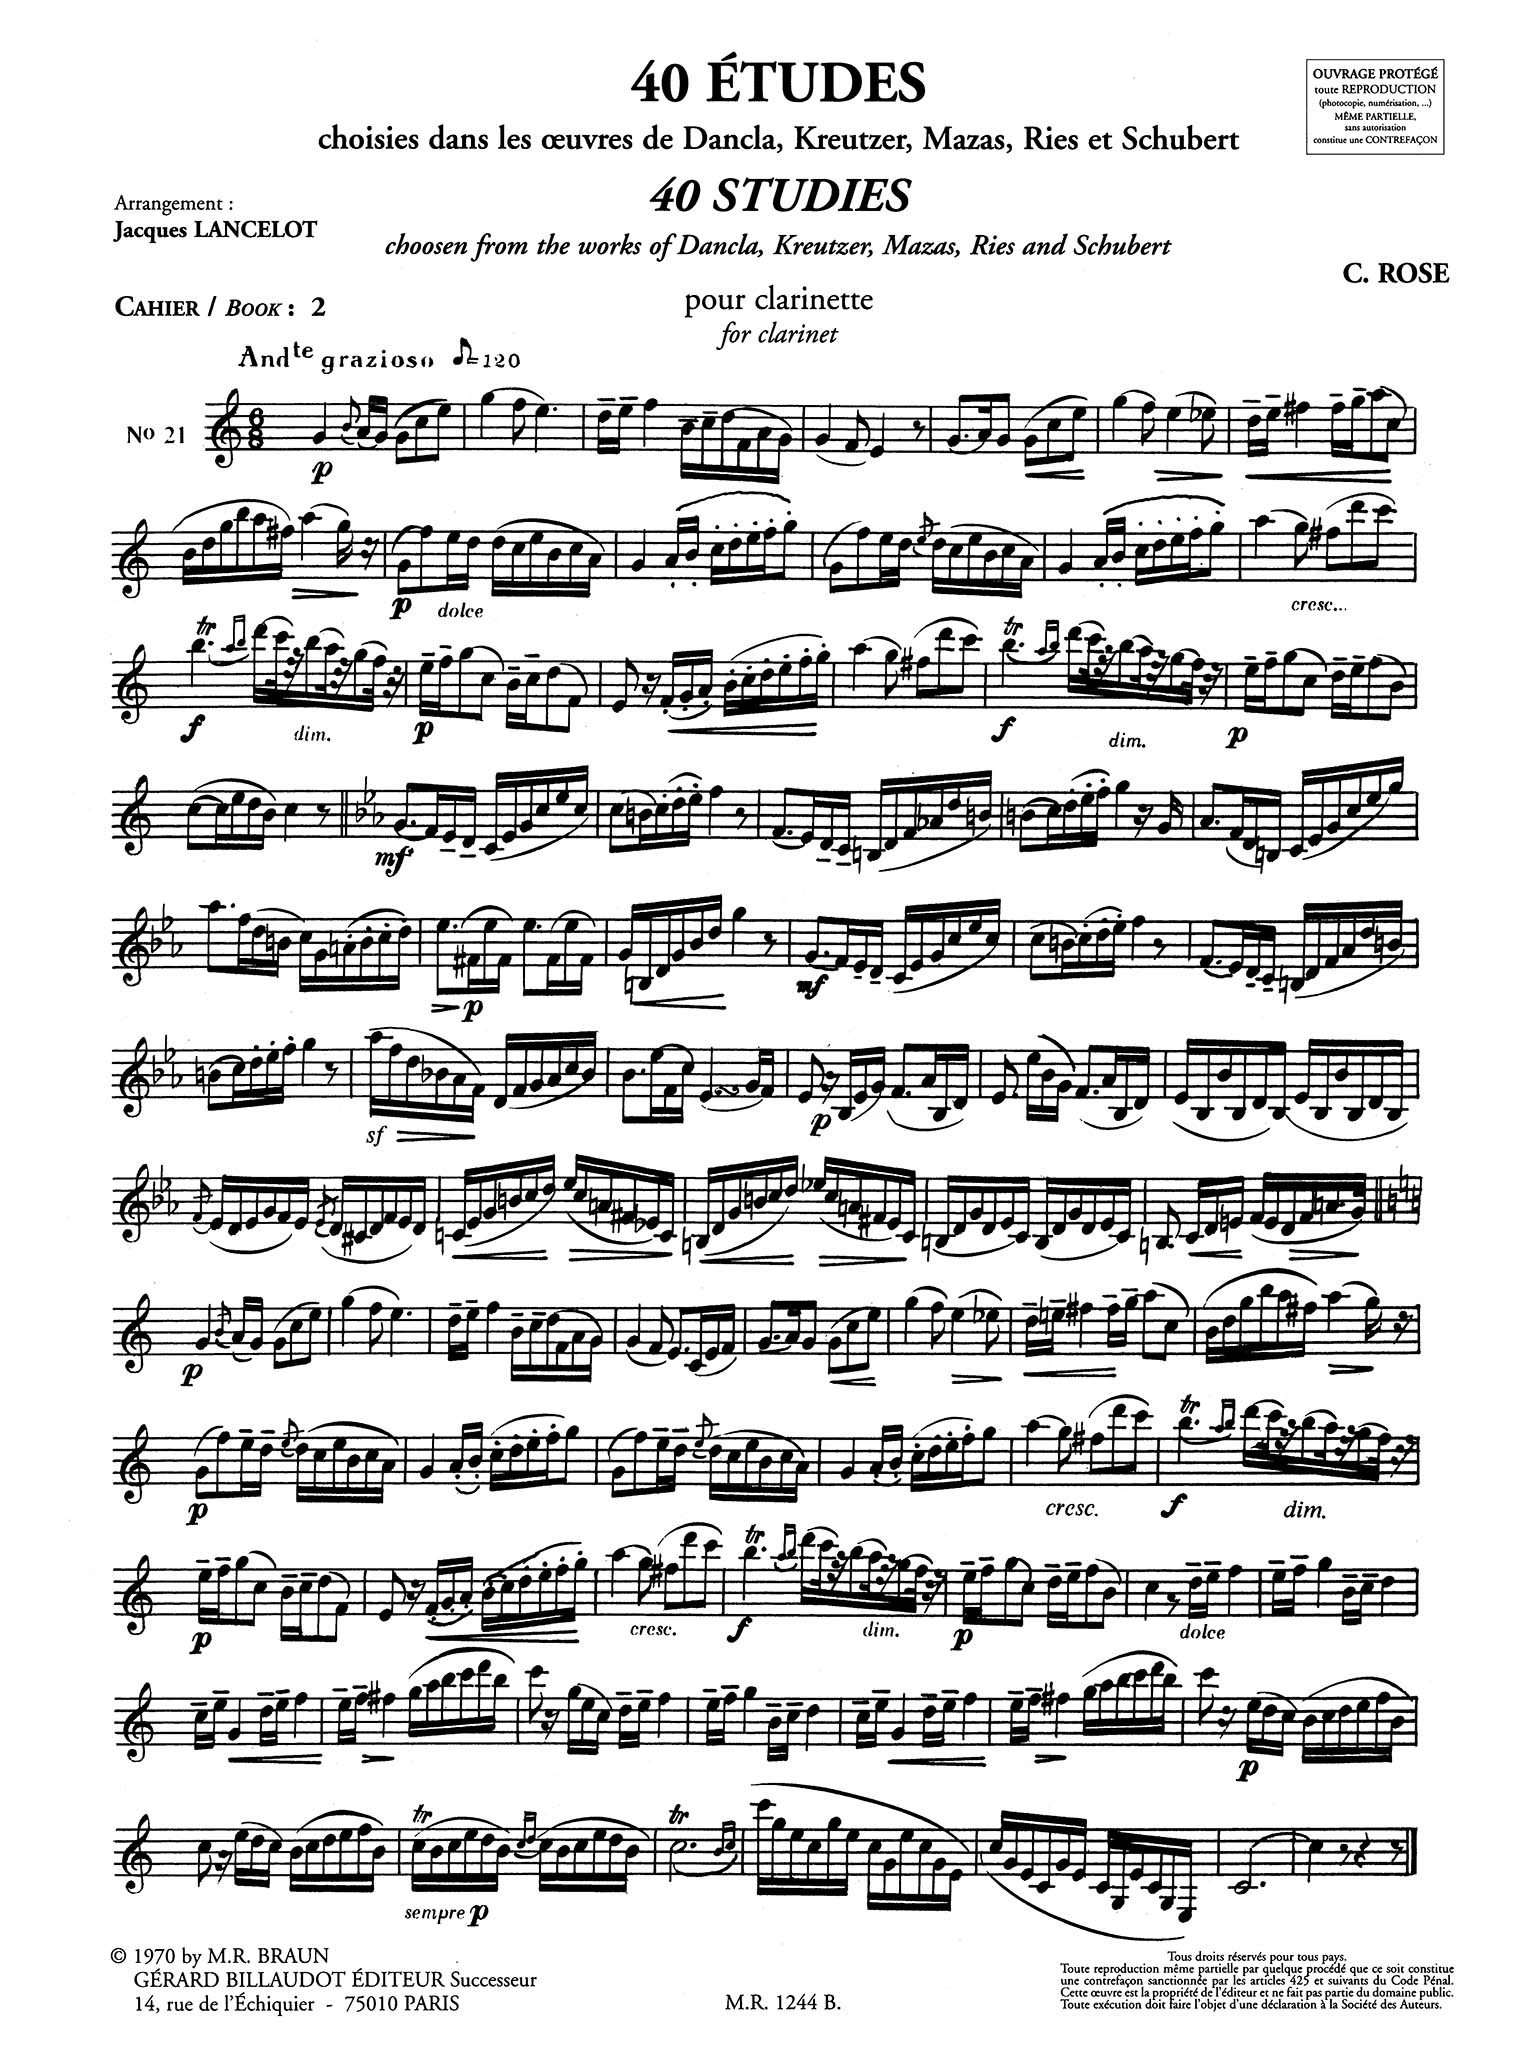 40 Etudes for Clarinet, Book 2 of 2 Page 4